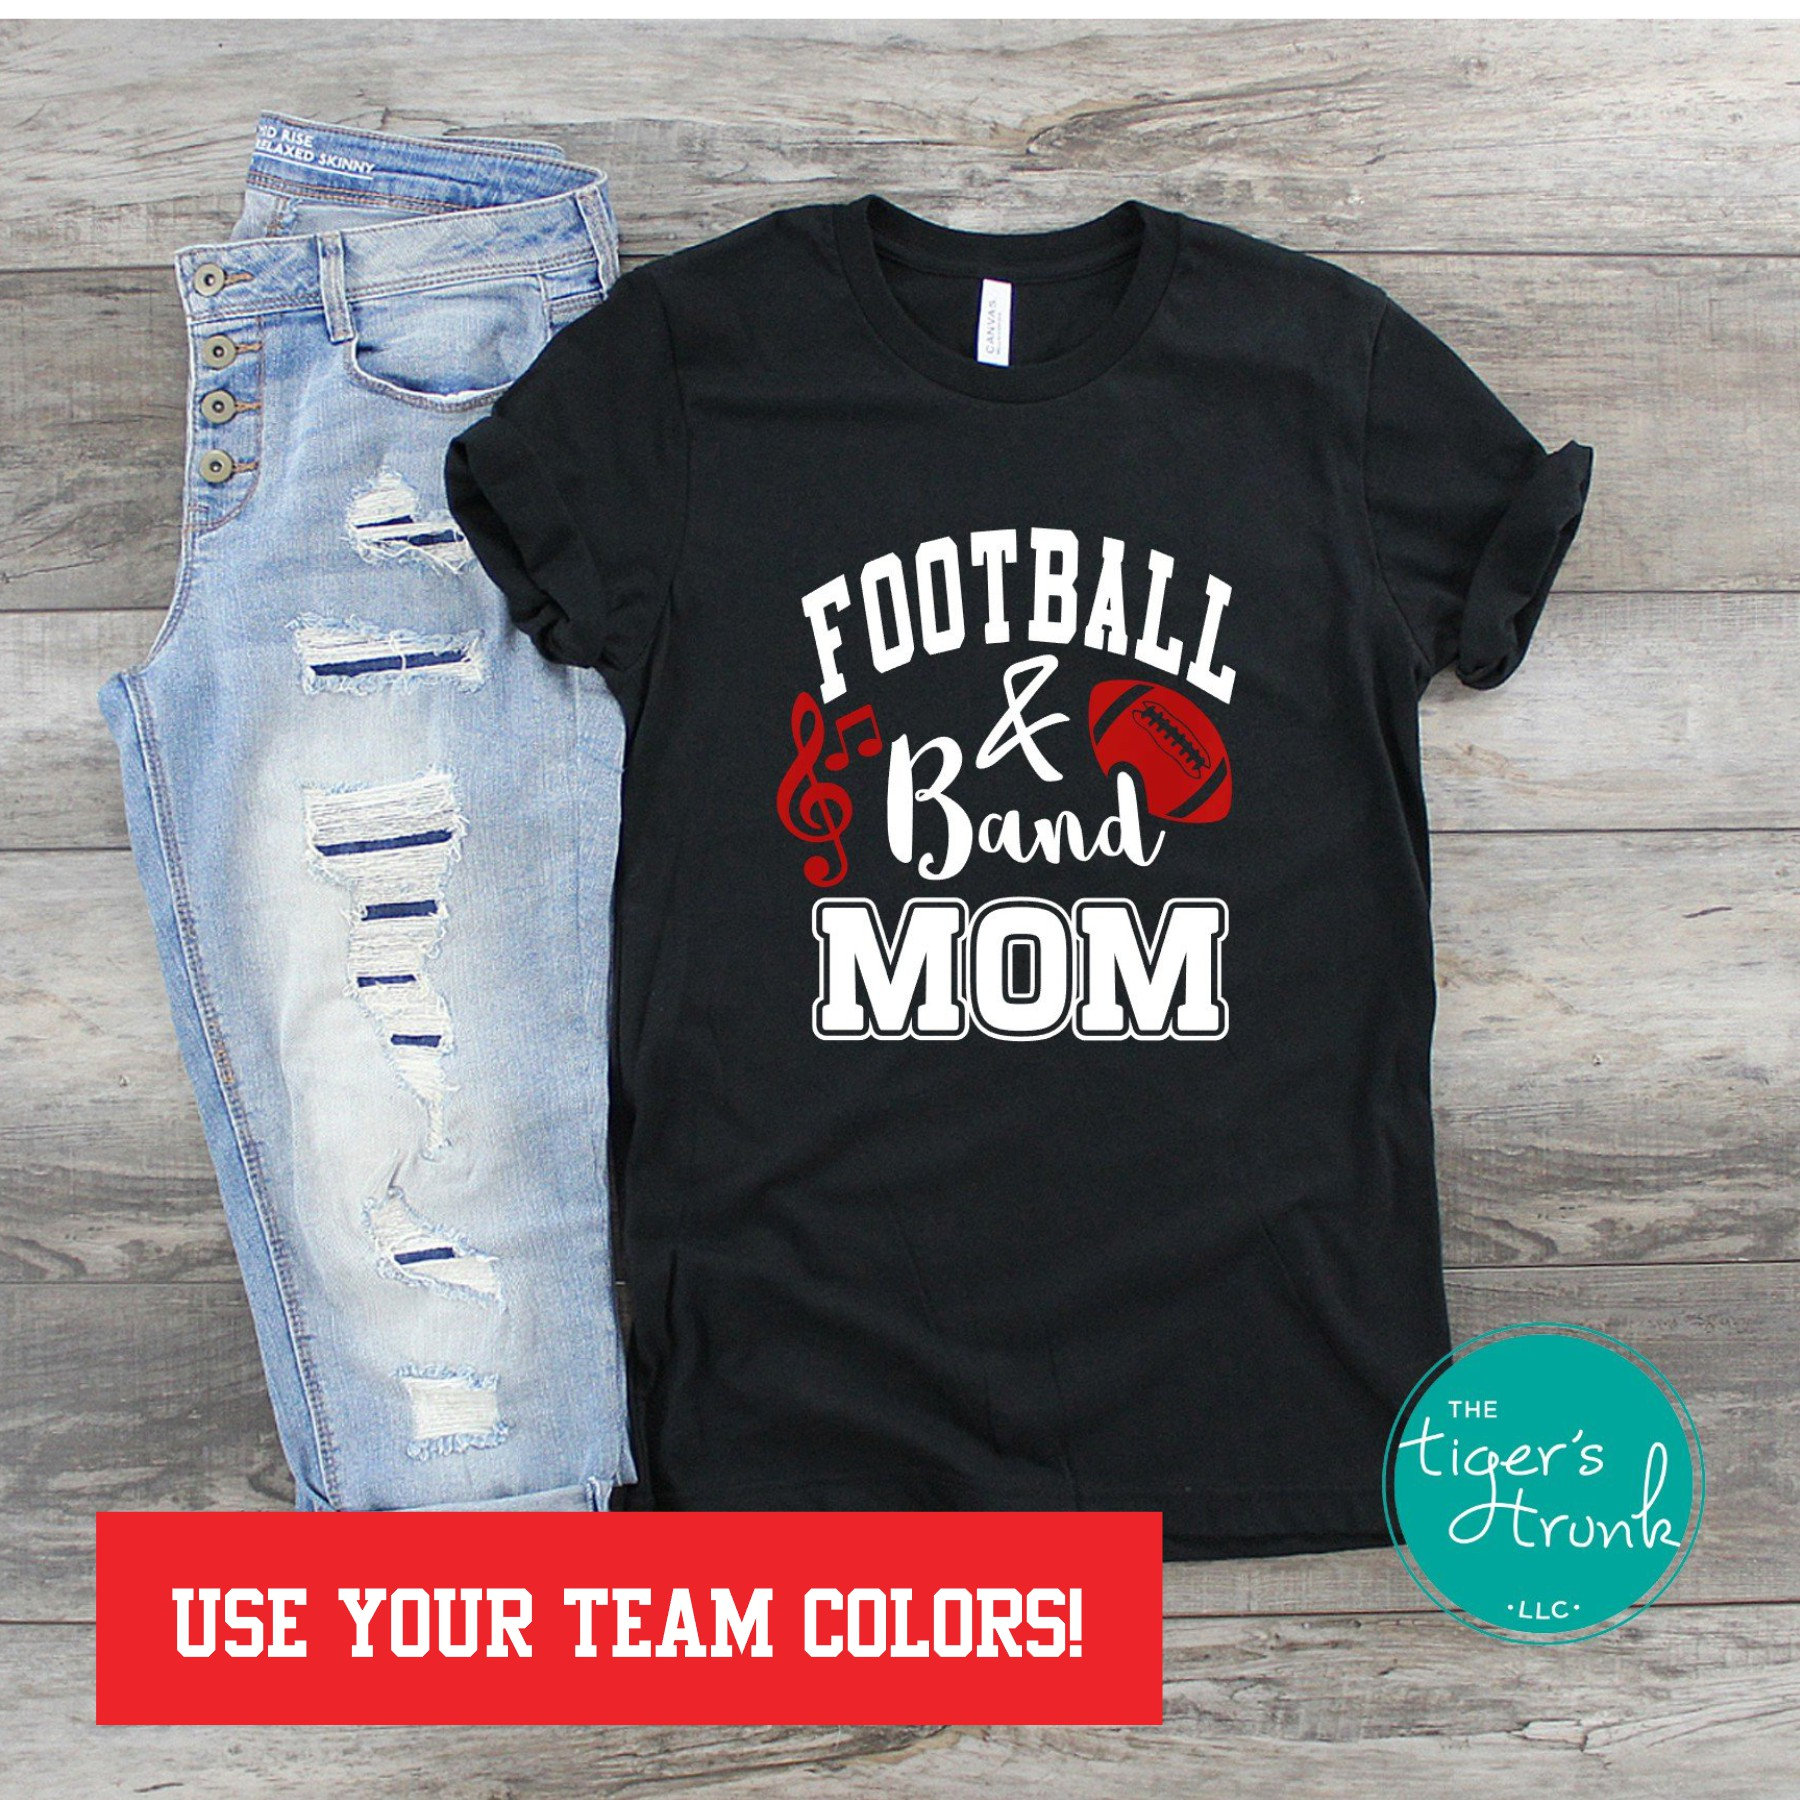 Customize with your Colors Short Sleeve Tshirt Bella Canvas Tshirt Glitter Band Mom T-shirt Band Shirts